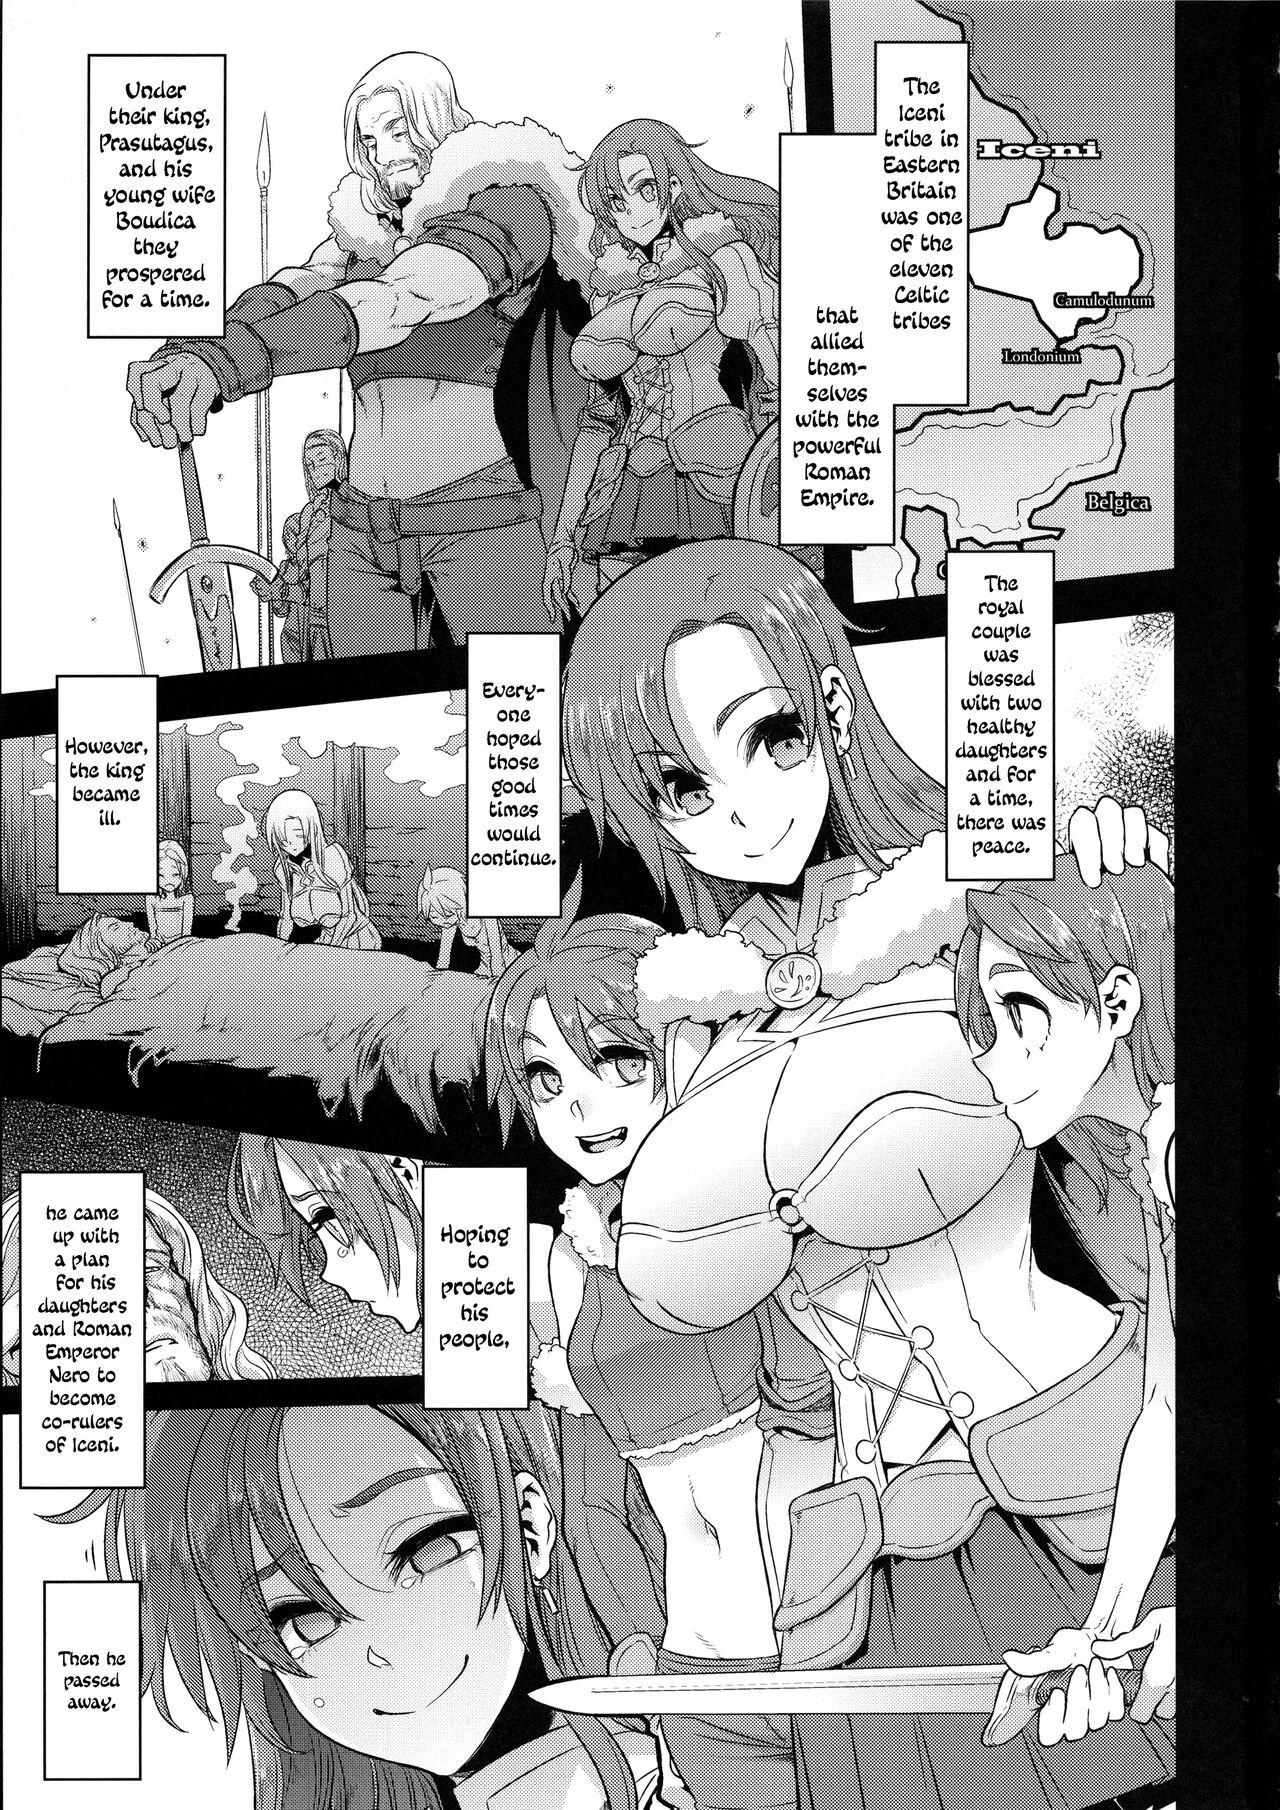 Eating Pussy (COMIC1☆13) [DA HOOTCH (ShindoL)] BOUDICA -Yakusoku Sarezaru Shouri no Joou- | The Queen of Victory Who Never Compromises (Fate/Grand Order) [English]] [EHCOVE] - Fate grand order Free Amateur Porn - Page 2